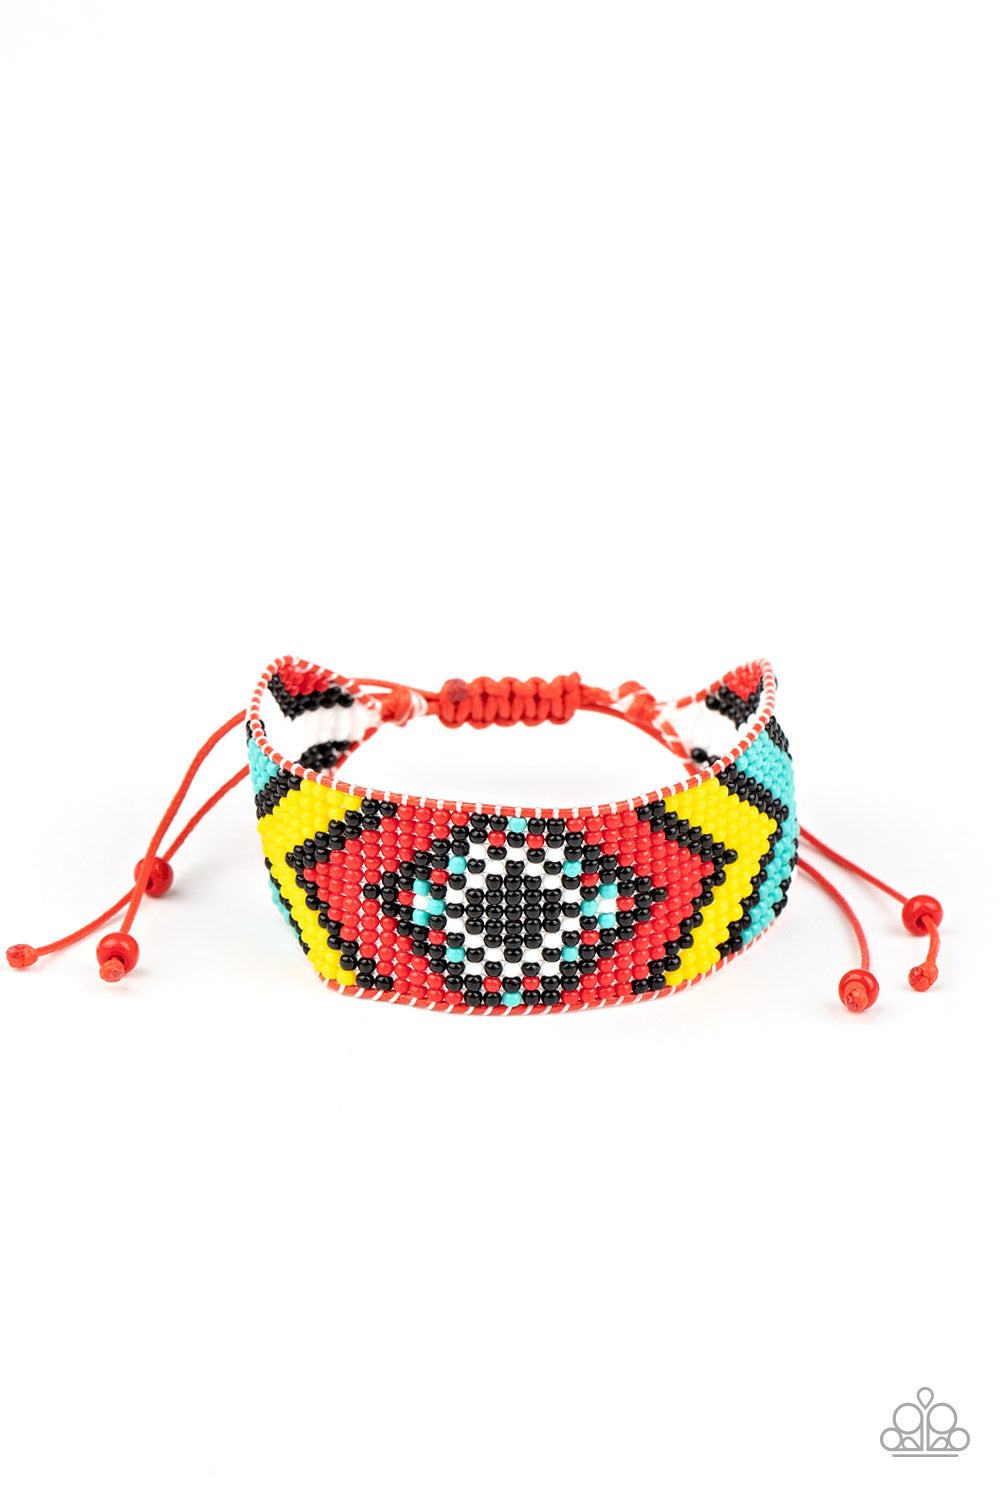 Desert Dive Red Bracelet - Paparazzi Accessories  A dainty collection of red, black, yellow, white, and turquoise beads are delicately weaved into a colorful textile pattern across the wrist for a southwestern inspired fashion. Features an adjustable sliding knot closure.  ﻿All Paparazzi Accessories are lead free and nickel free!  Sold as one individual bracelet.